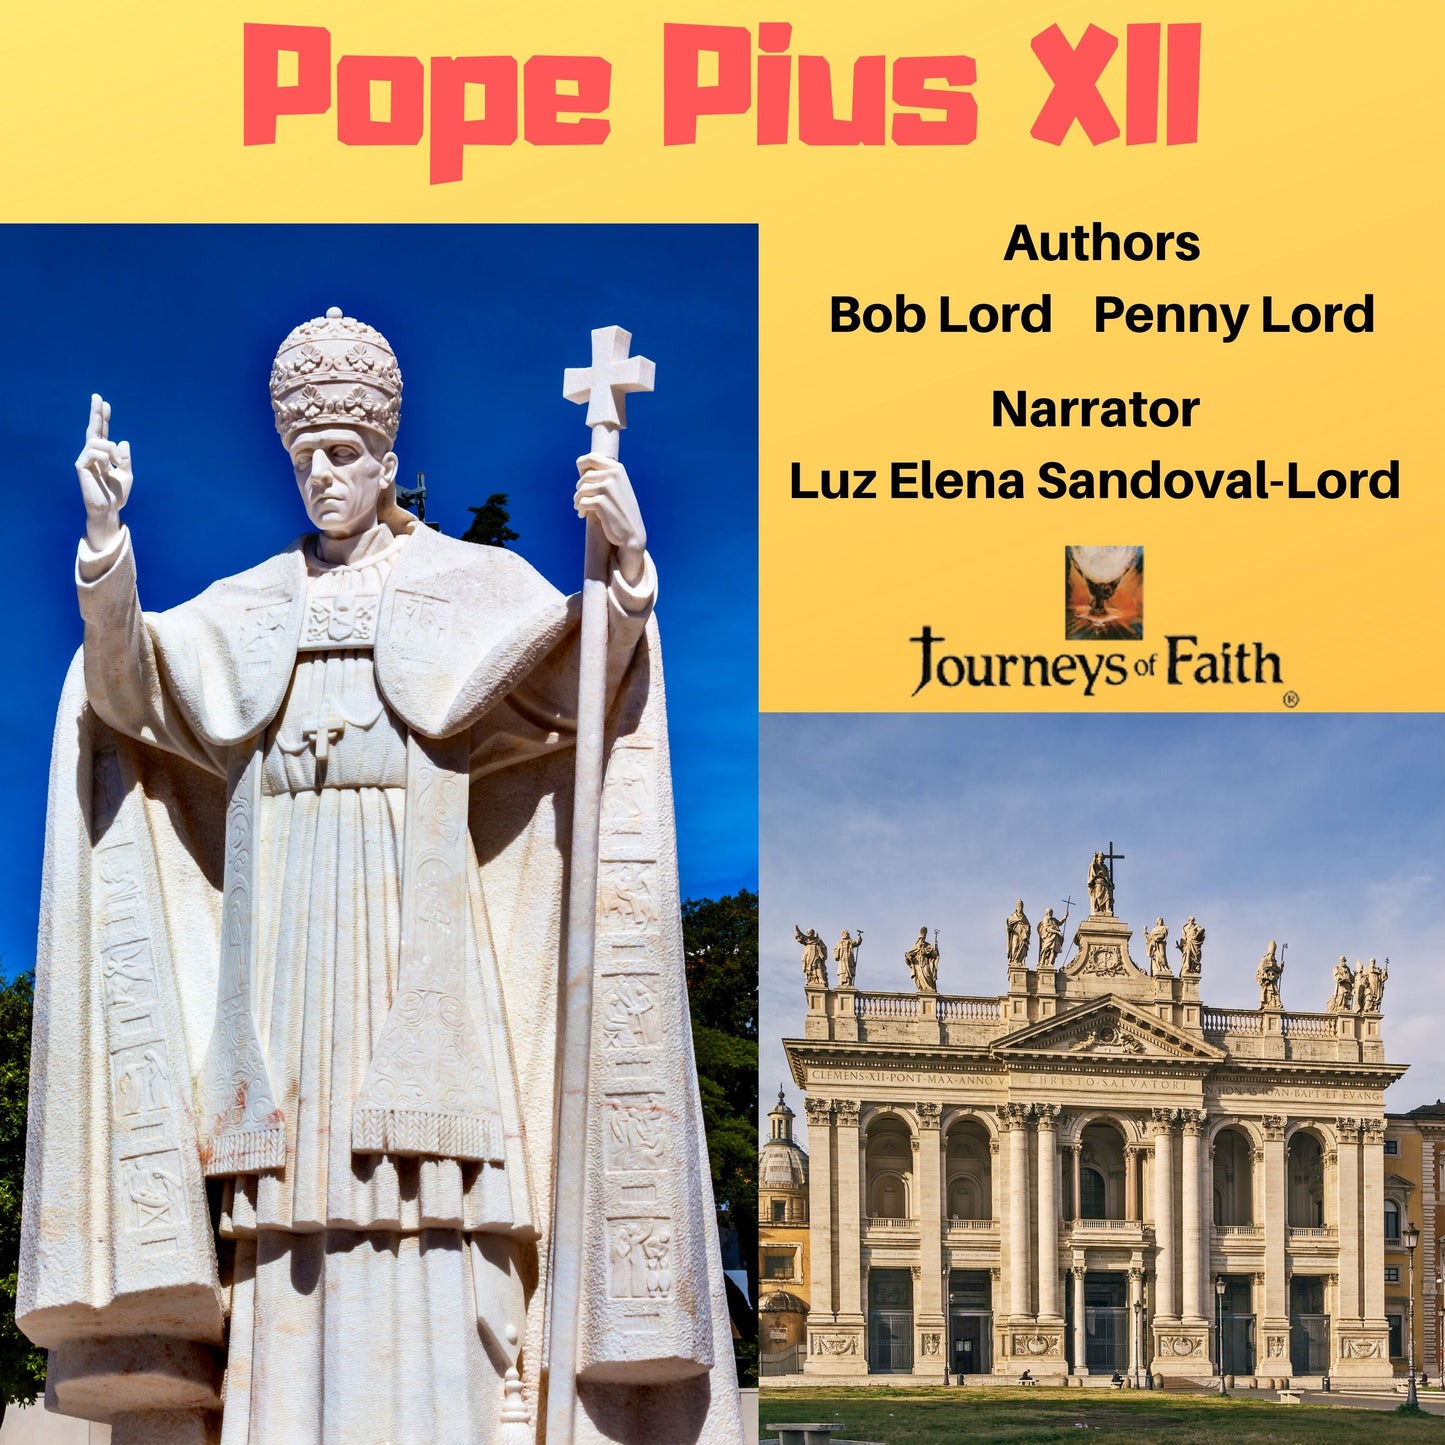 Heroes The Popes in Hard Times Book - Bob and Penny Lord